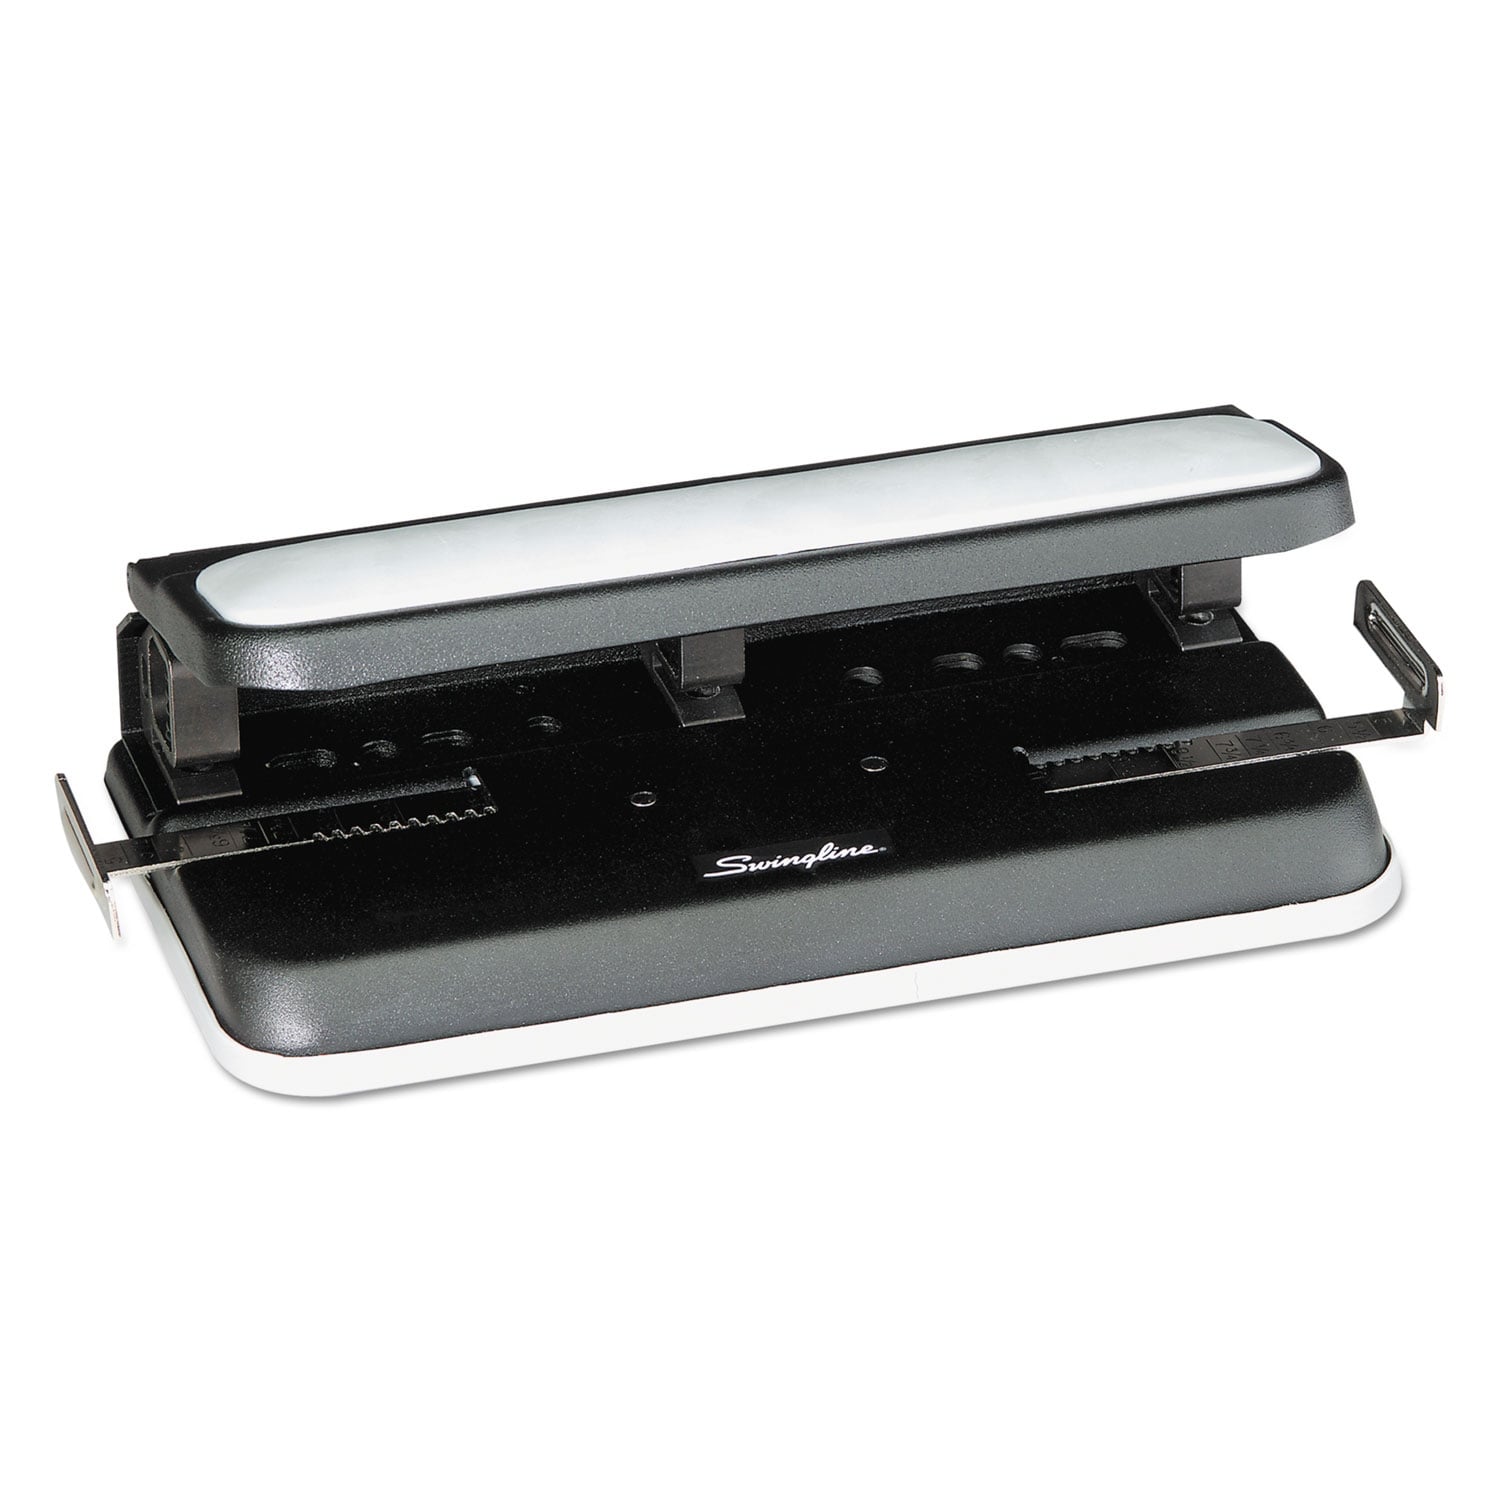 32-Sheet Easy Touch Two- to Three-Hole Punch with Cintamatic Centering, Black/Gray